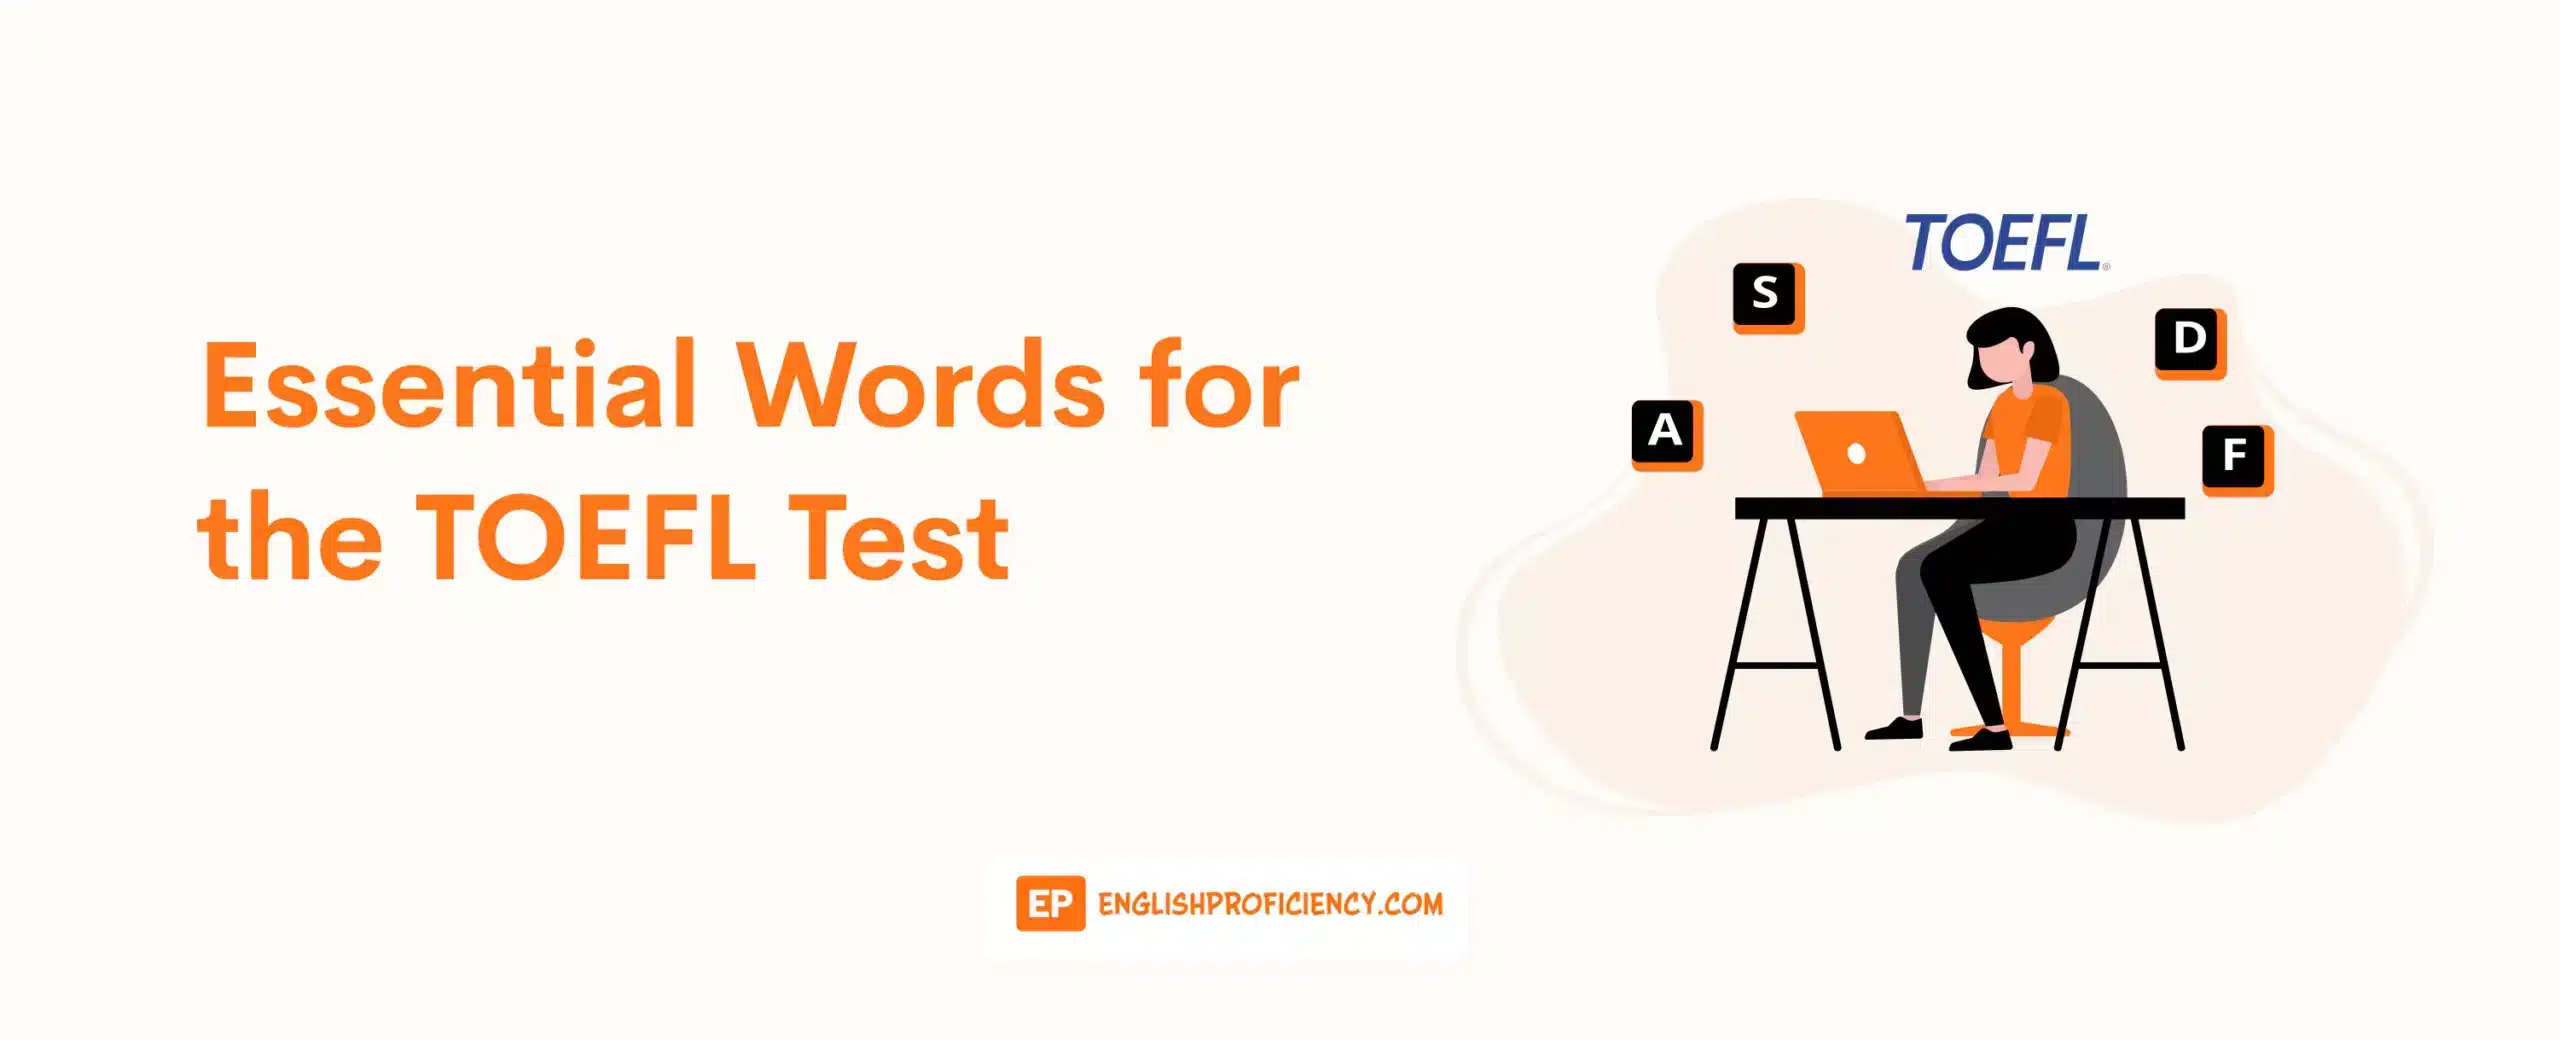 Essential Words for the TOEFL Test